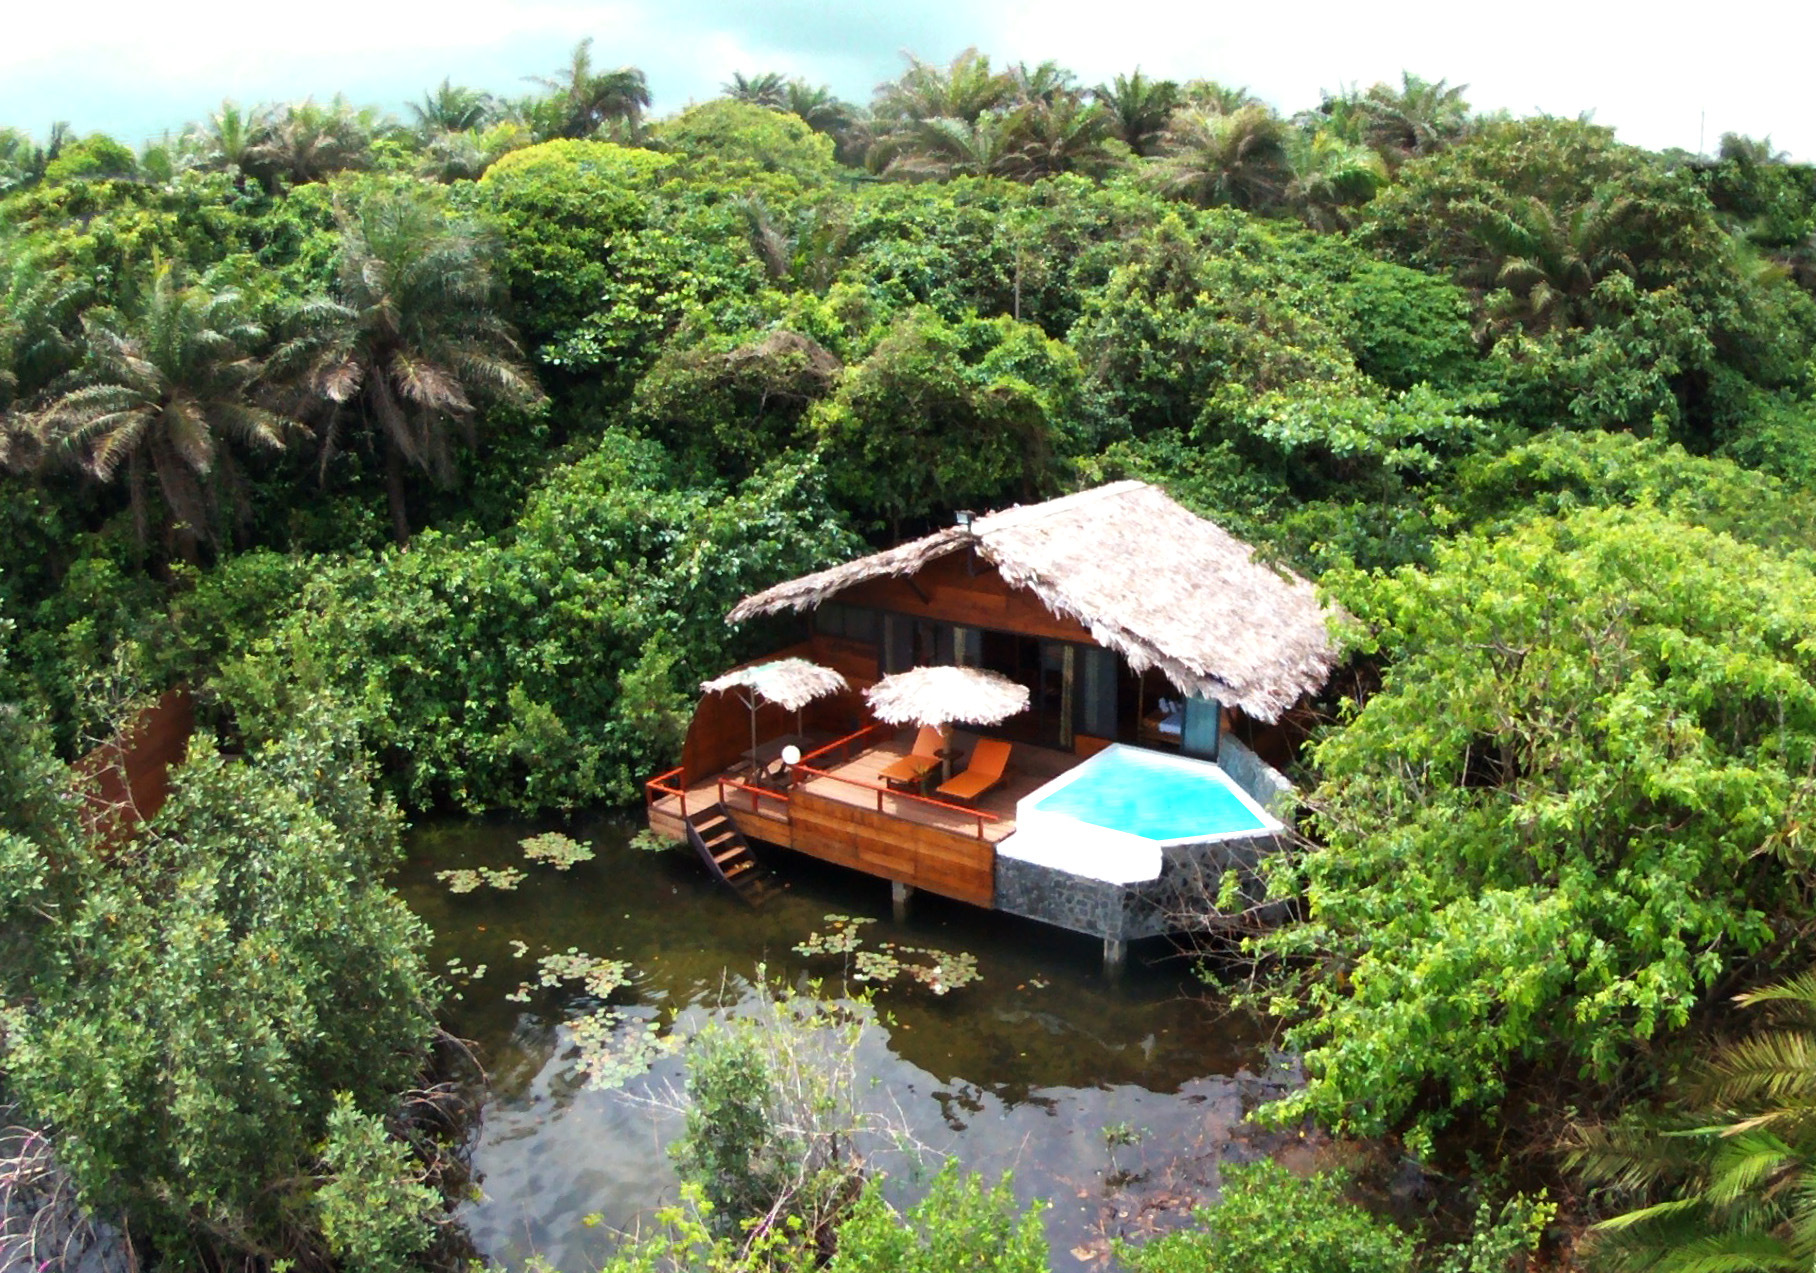 Aerial view of Mangrove Lodge hut with pool and thatched roof